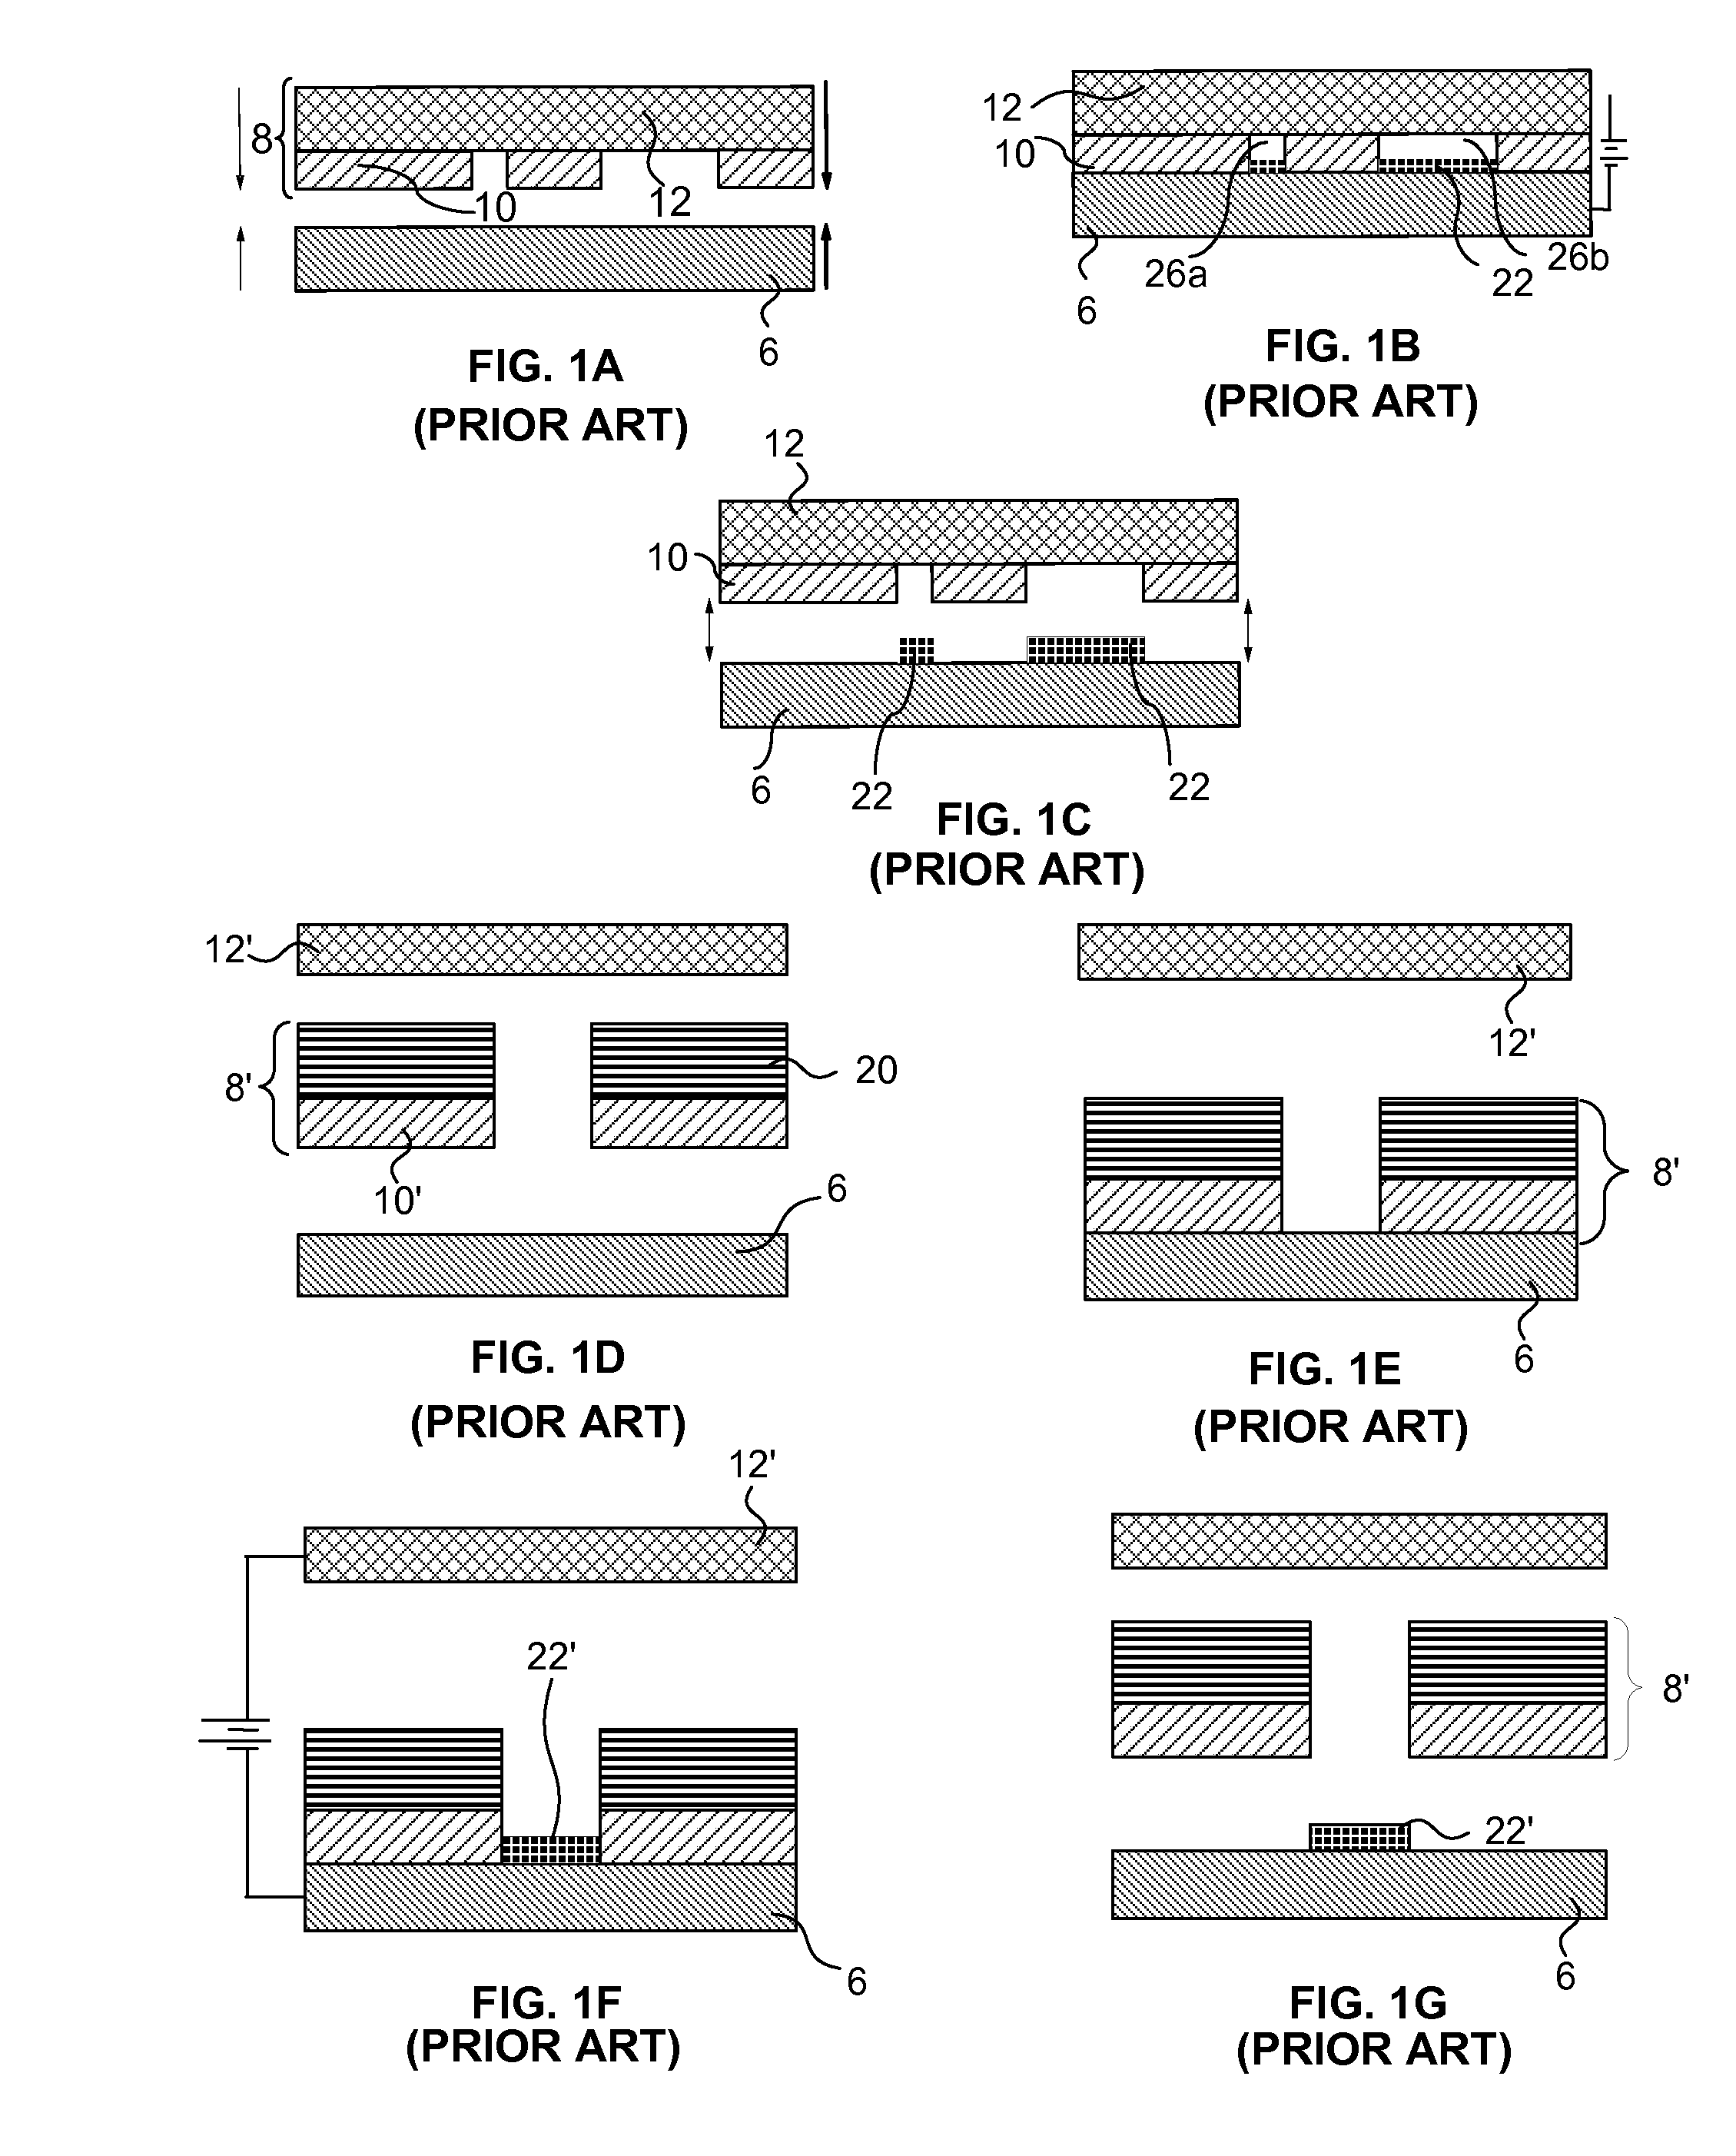 Electrochemical fabrication process for forming multilayer multimaterial microprobe structures